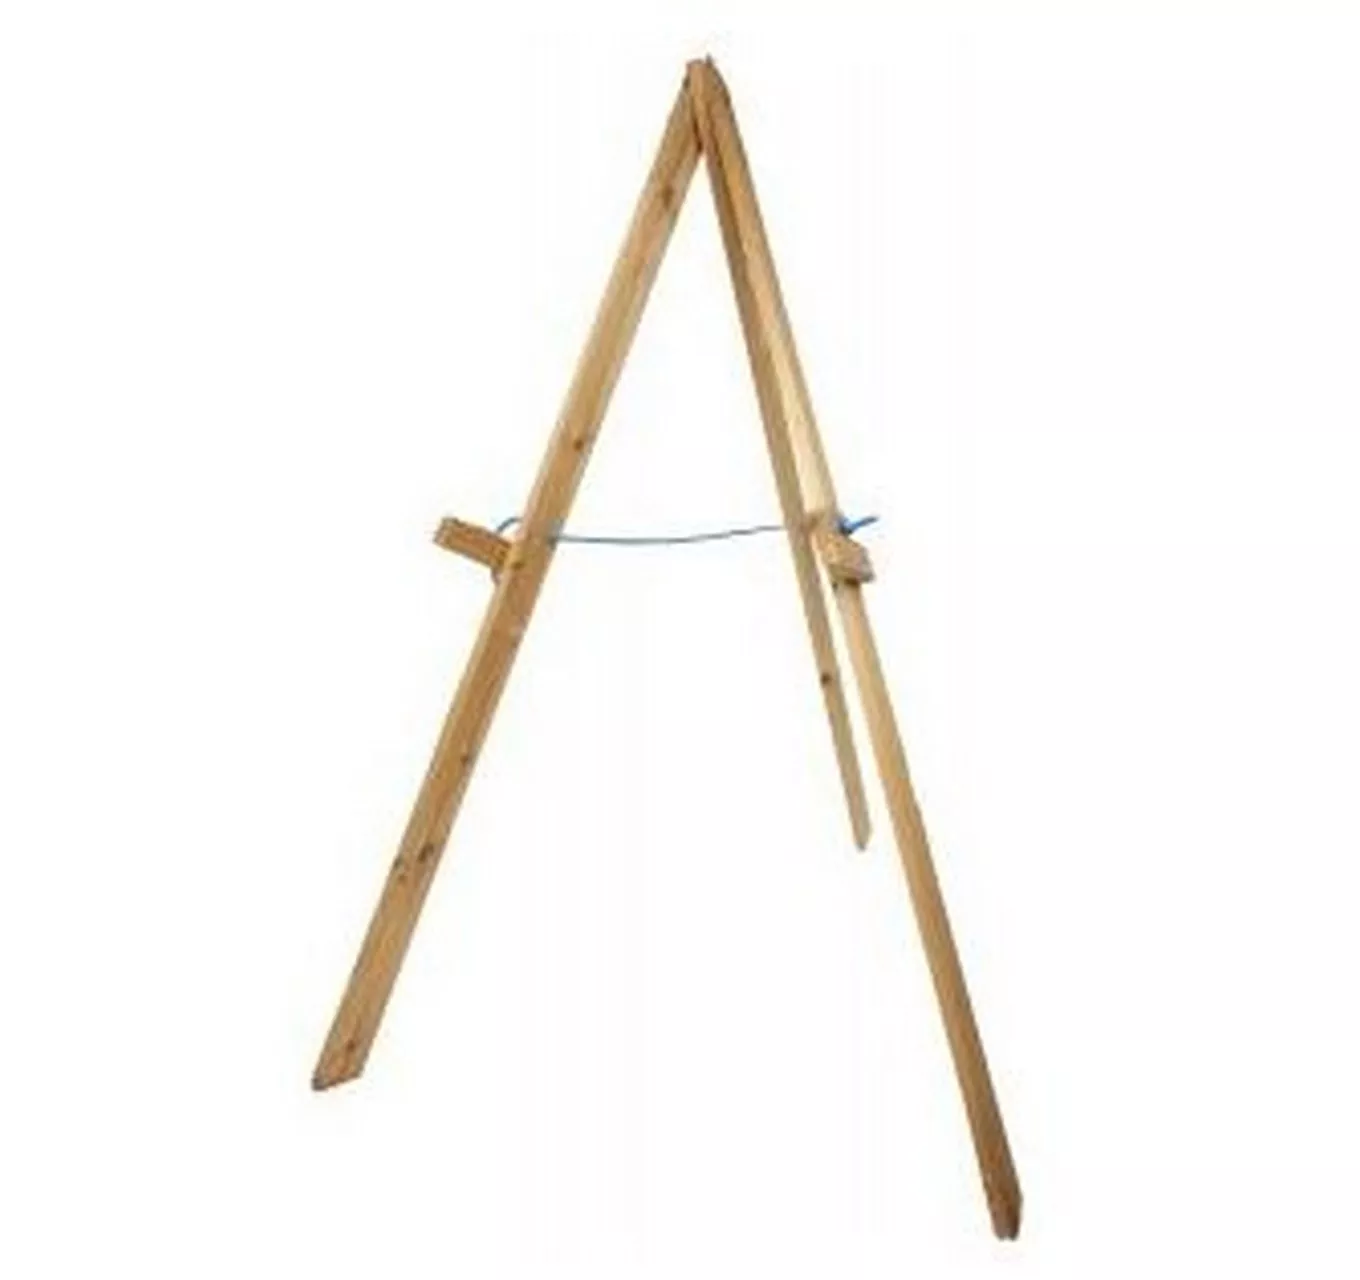 Wooden Archery Target Stand